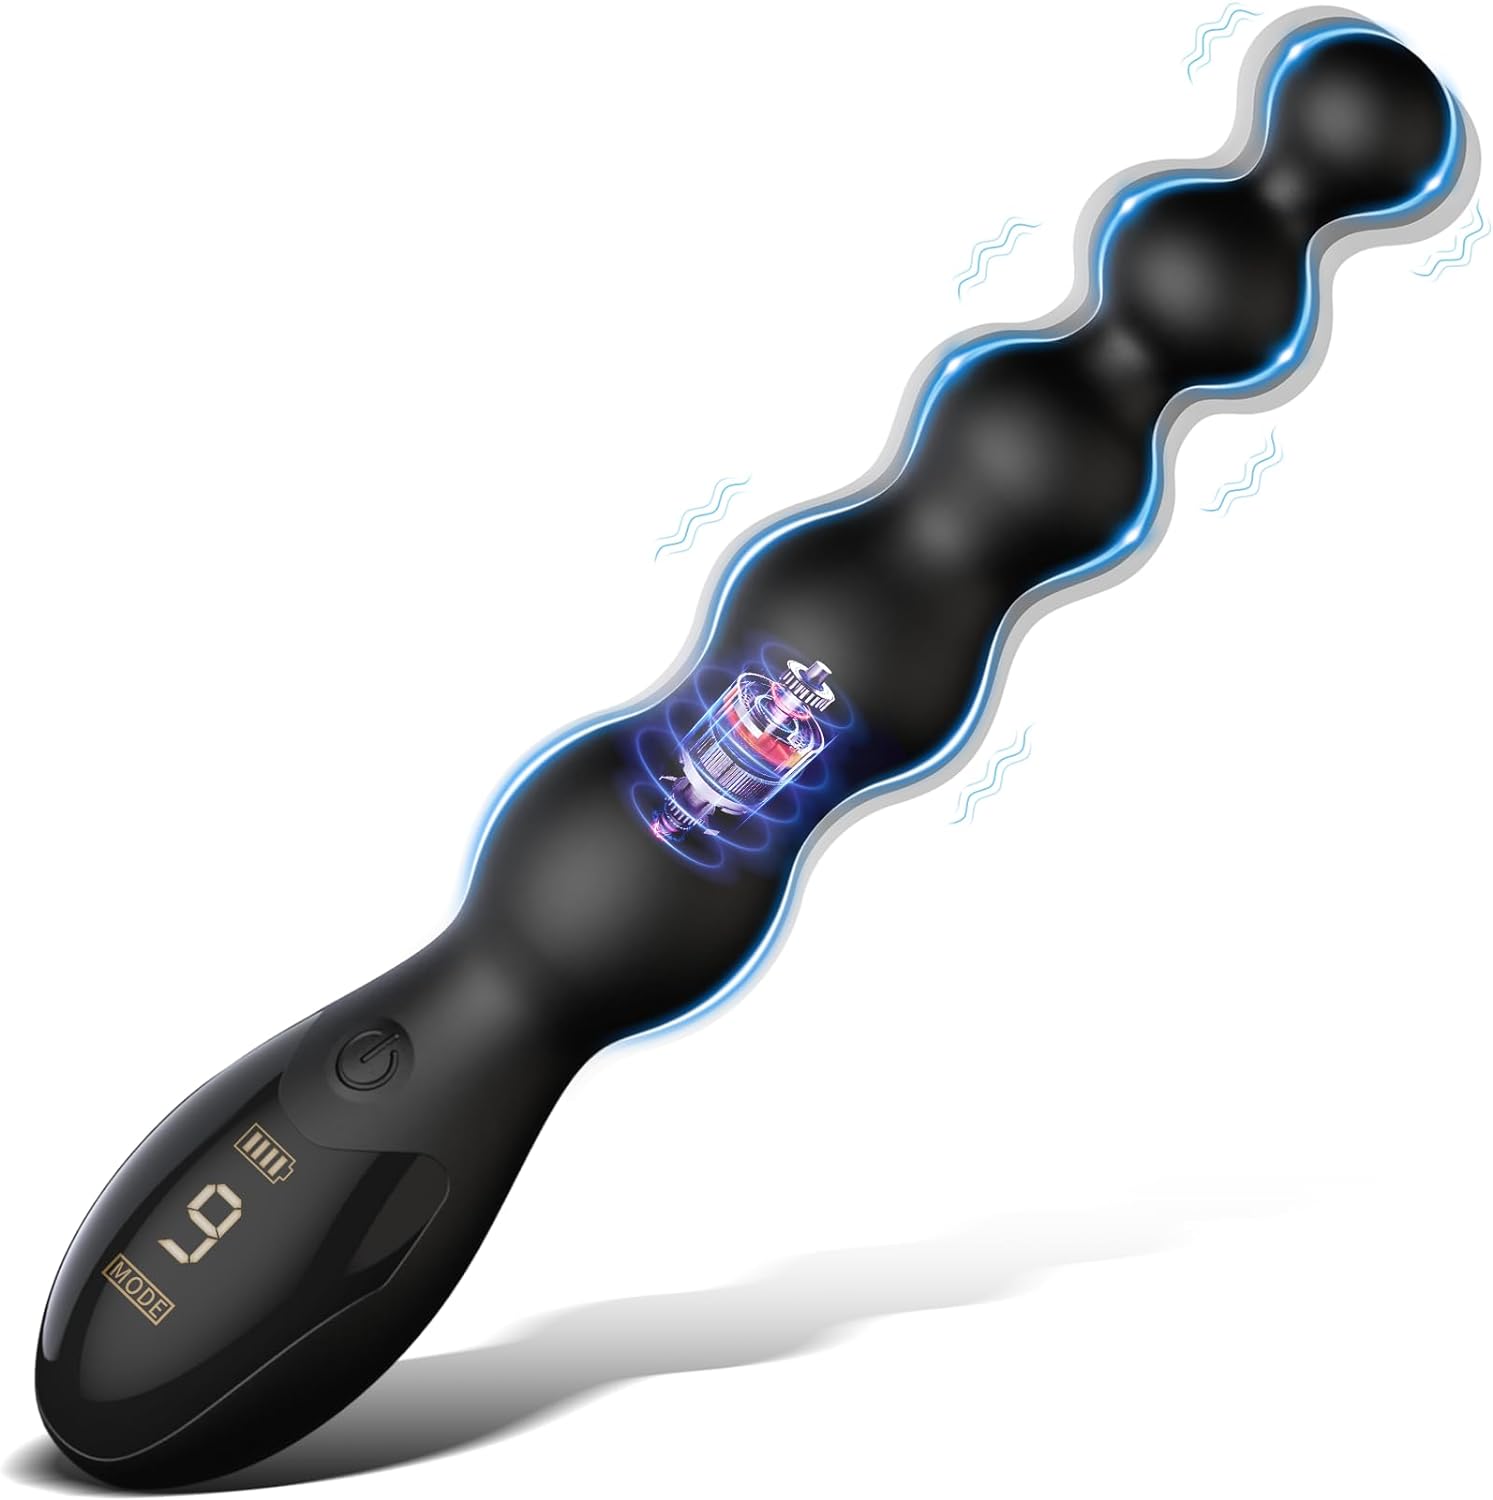 Male Sex Toys Anal Plug - Adult Toys Anal Beads Sex Toys for Men and Women Adult Toy Sex Toy Anal Vibrators Graduated & Display Design Anal Toys Dildo Prostate Massager with 9 Vibration Modes